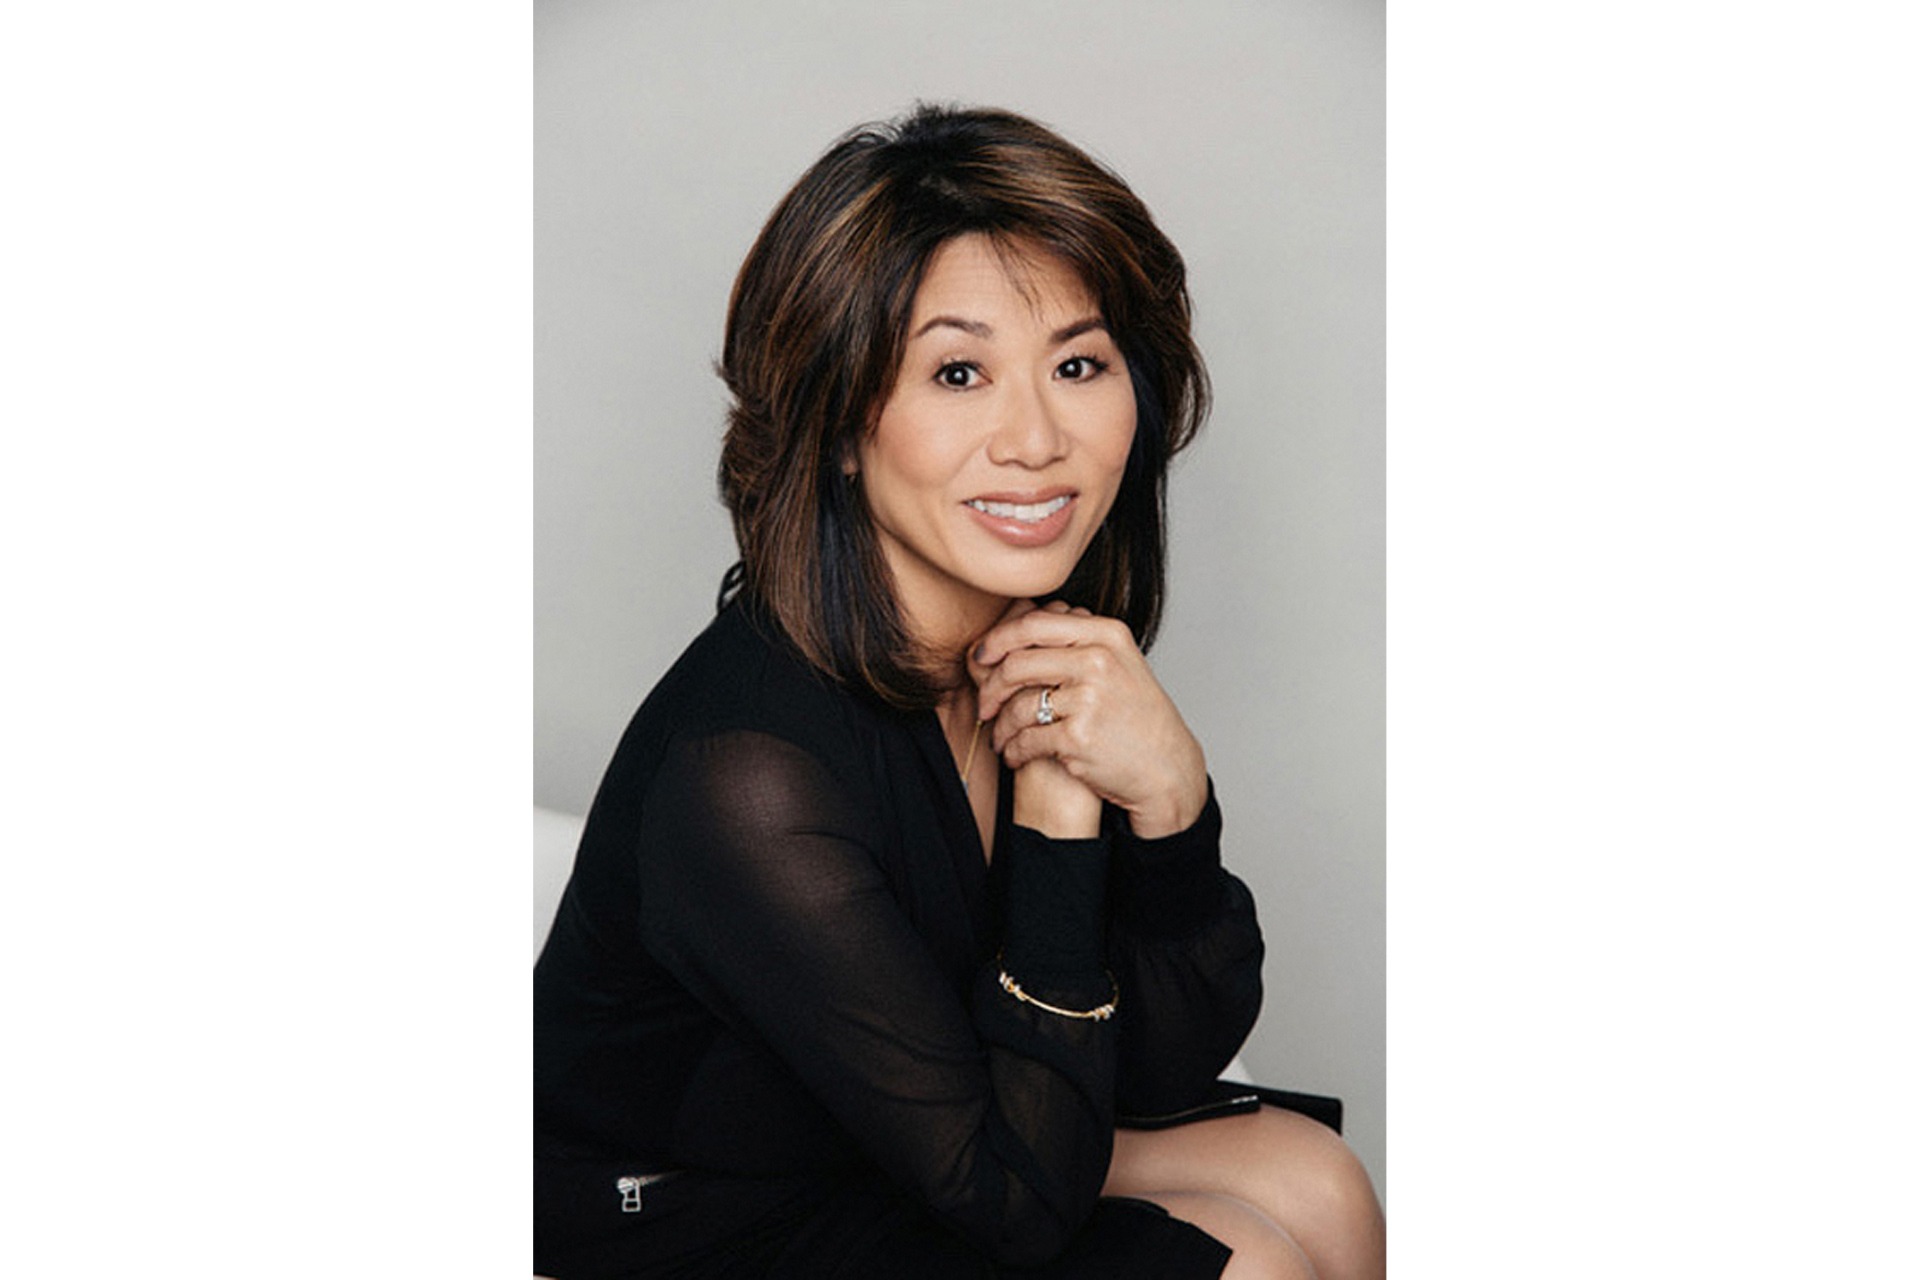 SiuYin Ko, Vice President, Global Sales at Rosewood Hotel Group